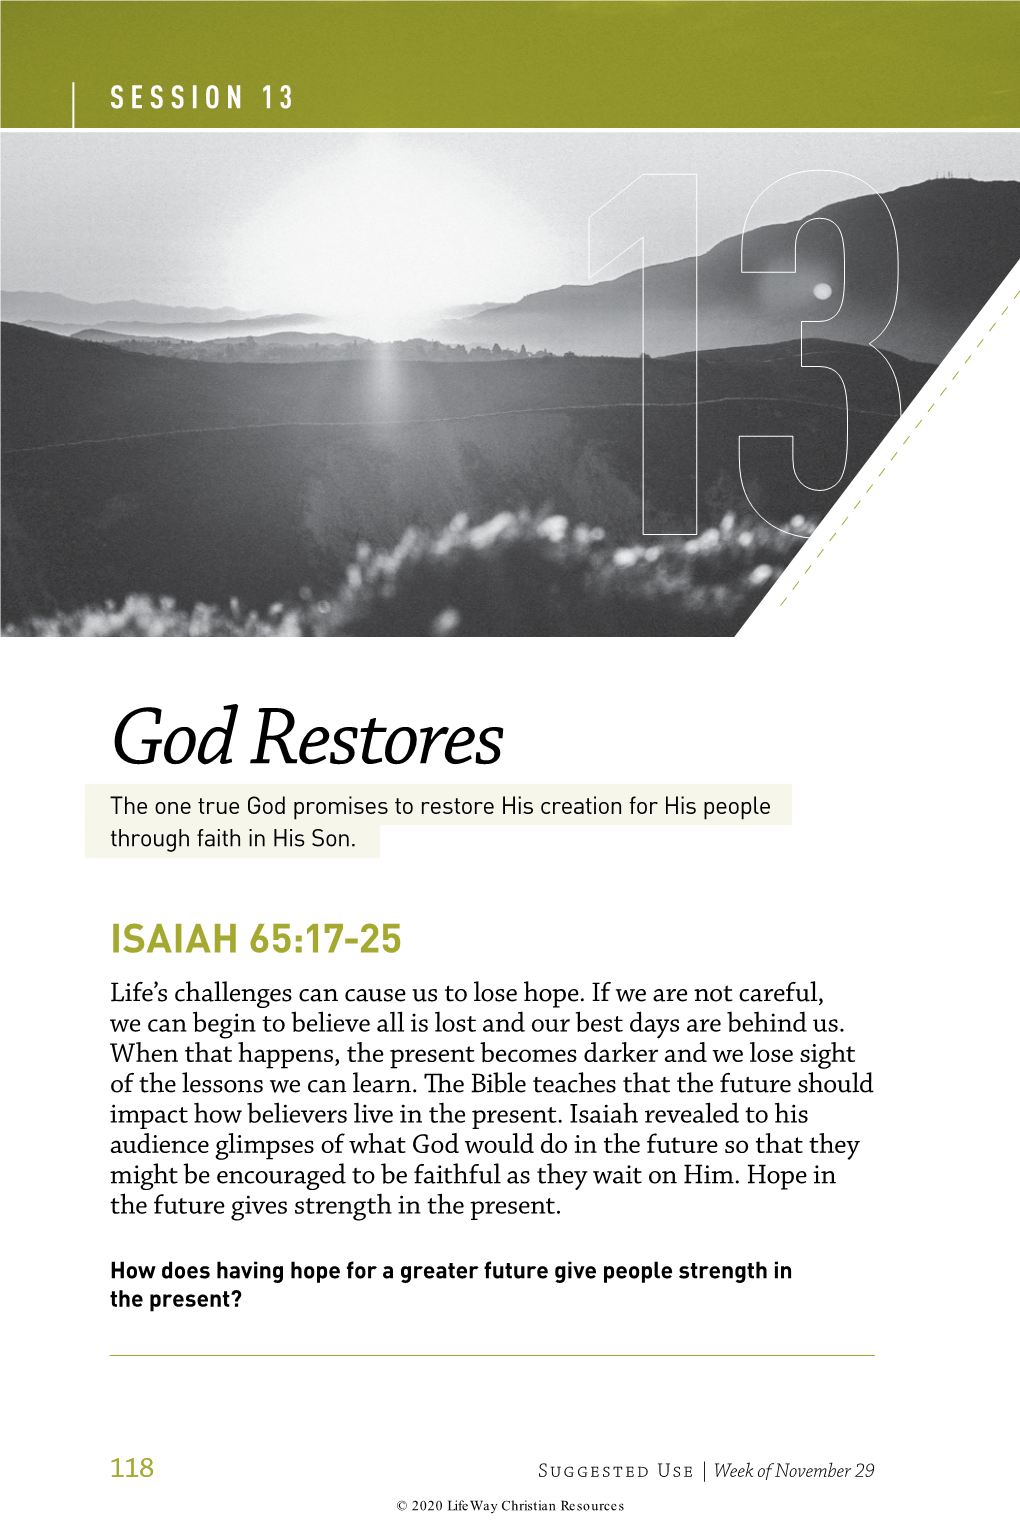 God Restores the One True God Promises to Restore His Creation for His People Through Faith in His Son